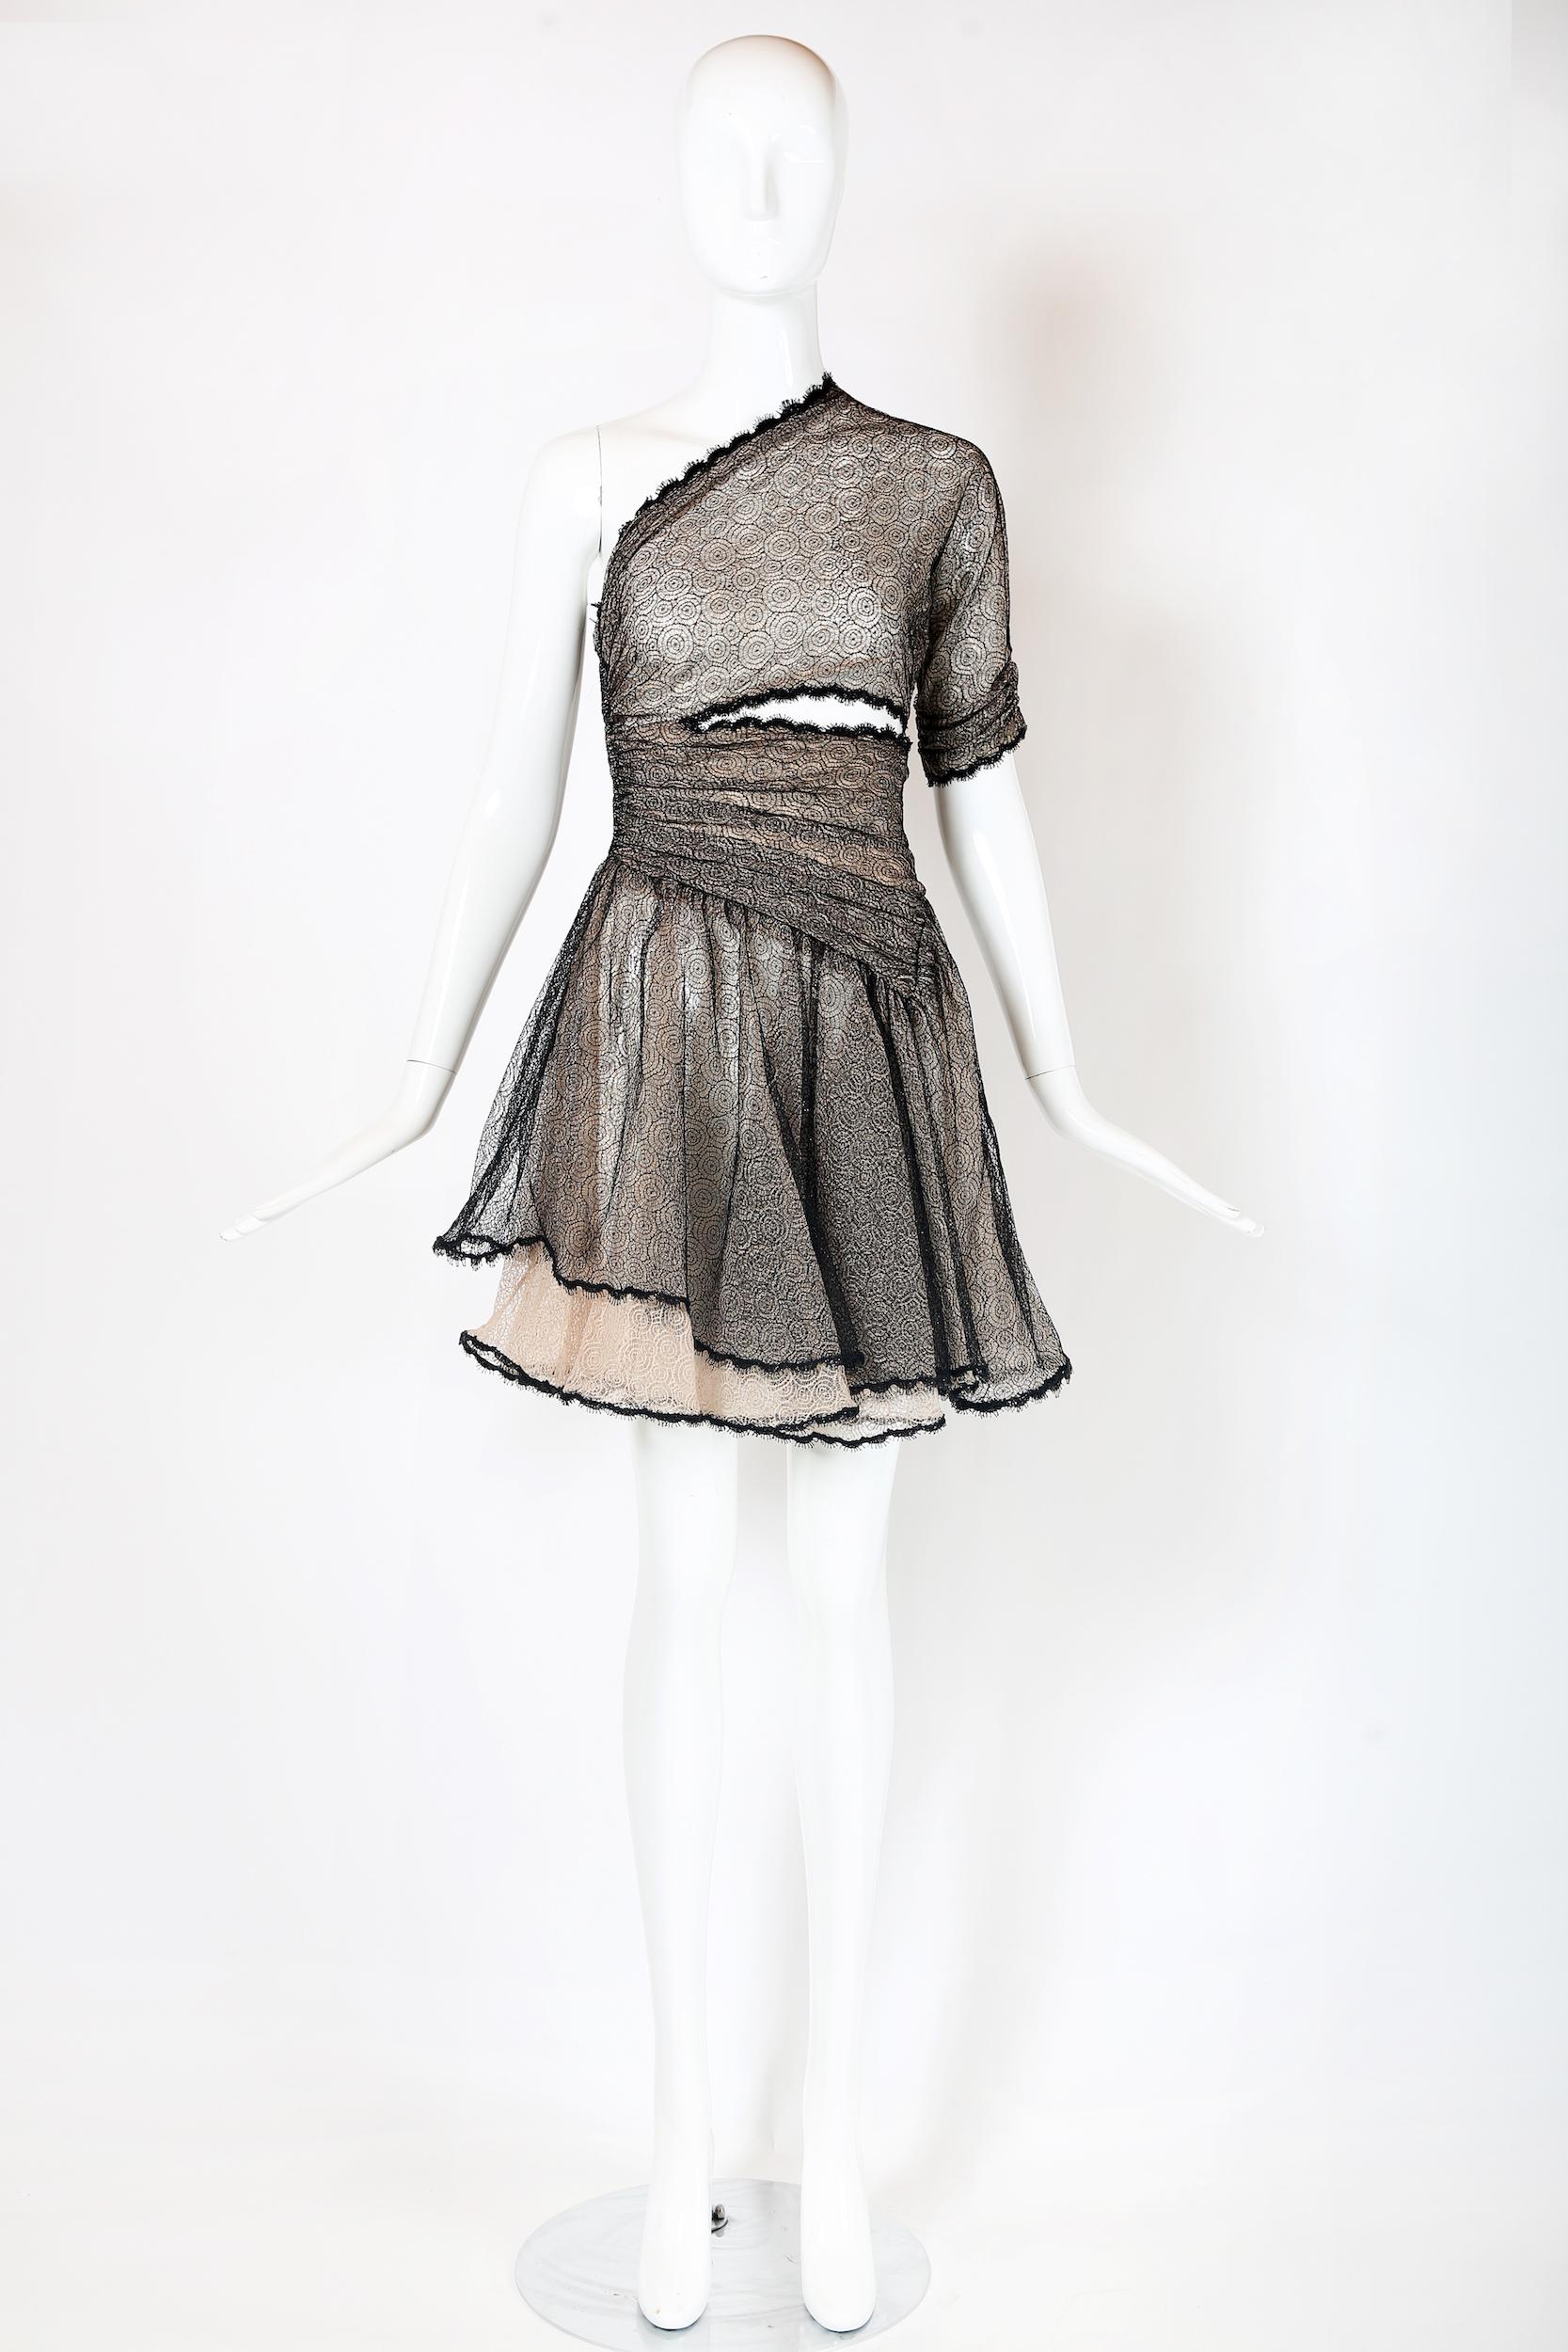 Vintage Geoffrey Beene single shoulder mini dress comprised of a layer of black metallic cobweb lace over a layer of pale pink cobweb lace, a full flouncy skirt and a cutout at the waistline. Zippers up the right side seam. In excellent condition